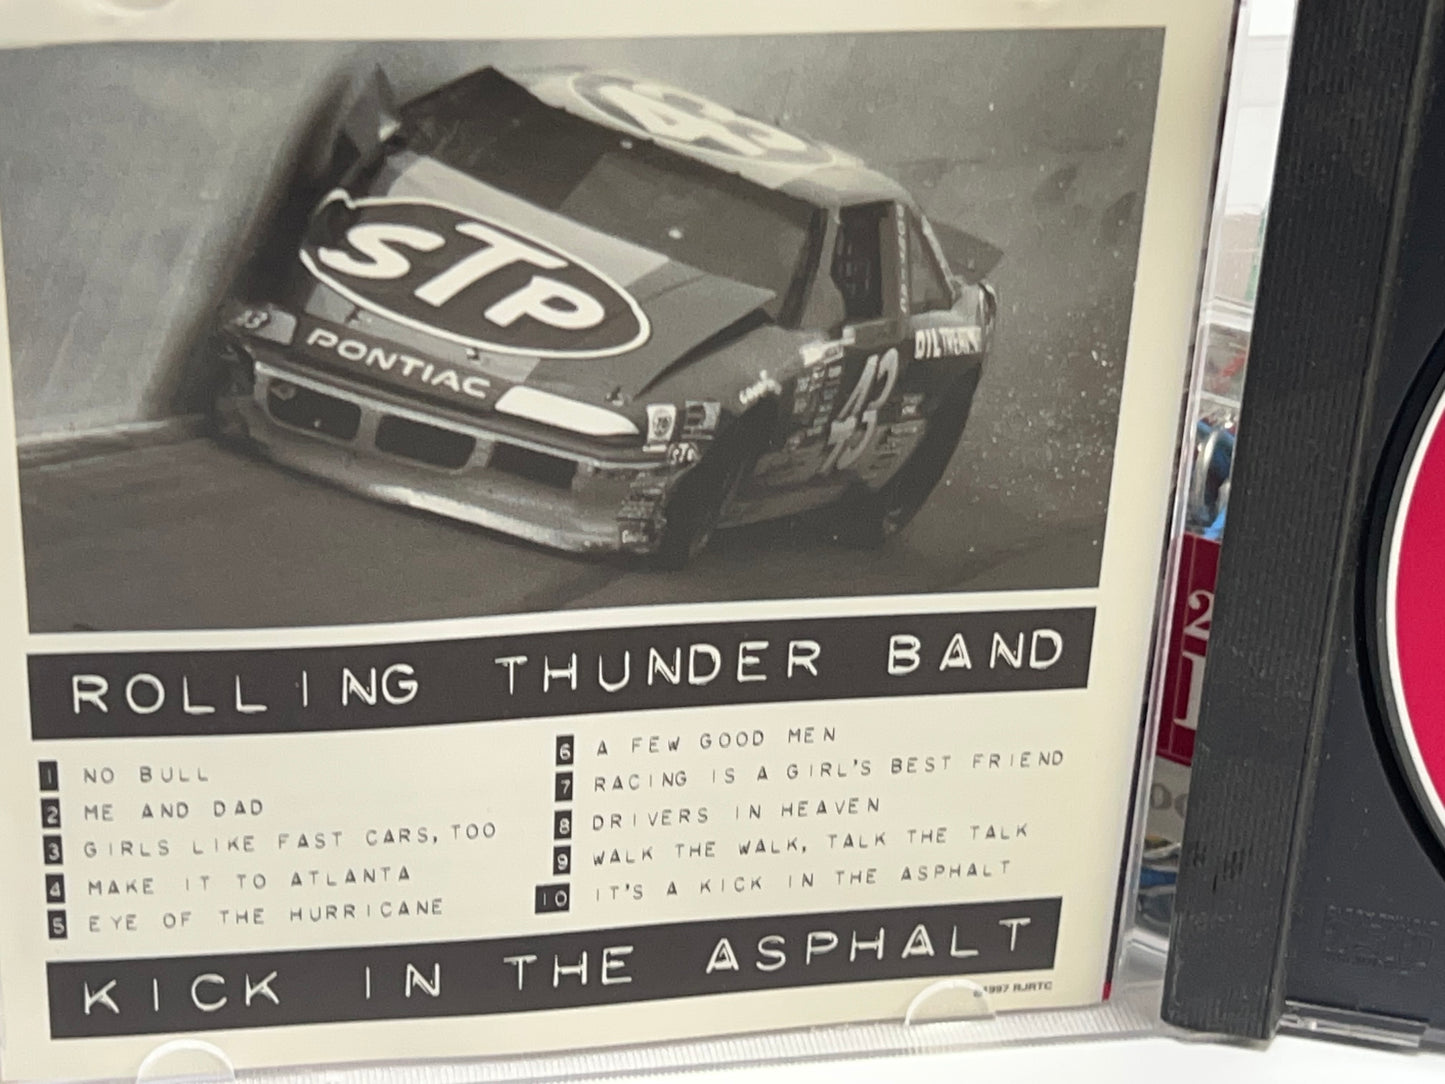 Kick In The Asphalt by Rolling Thunder Band (CD,1997)